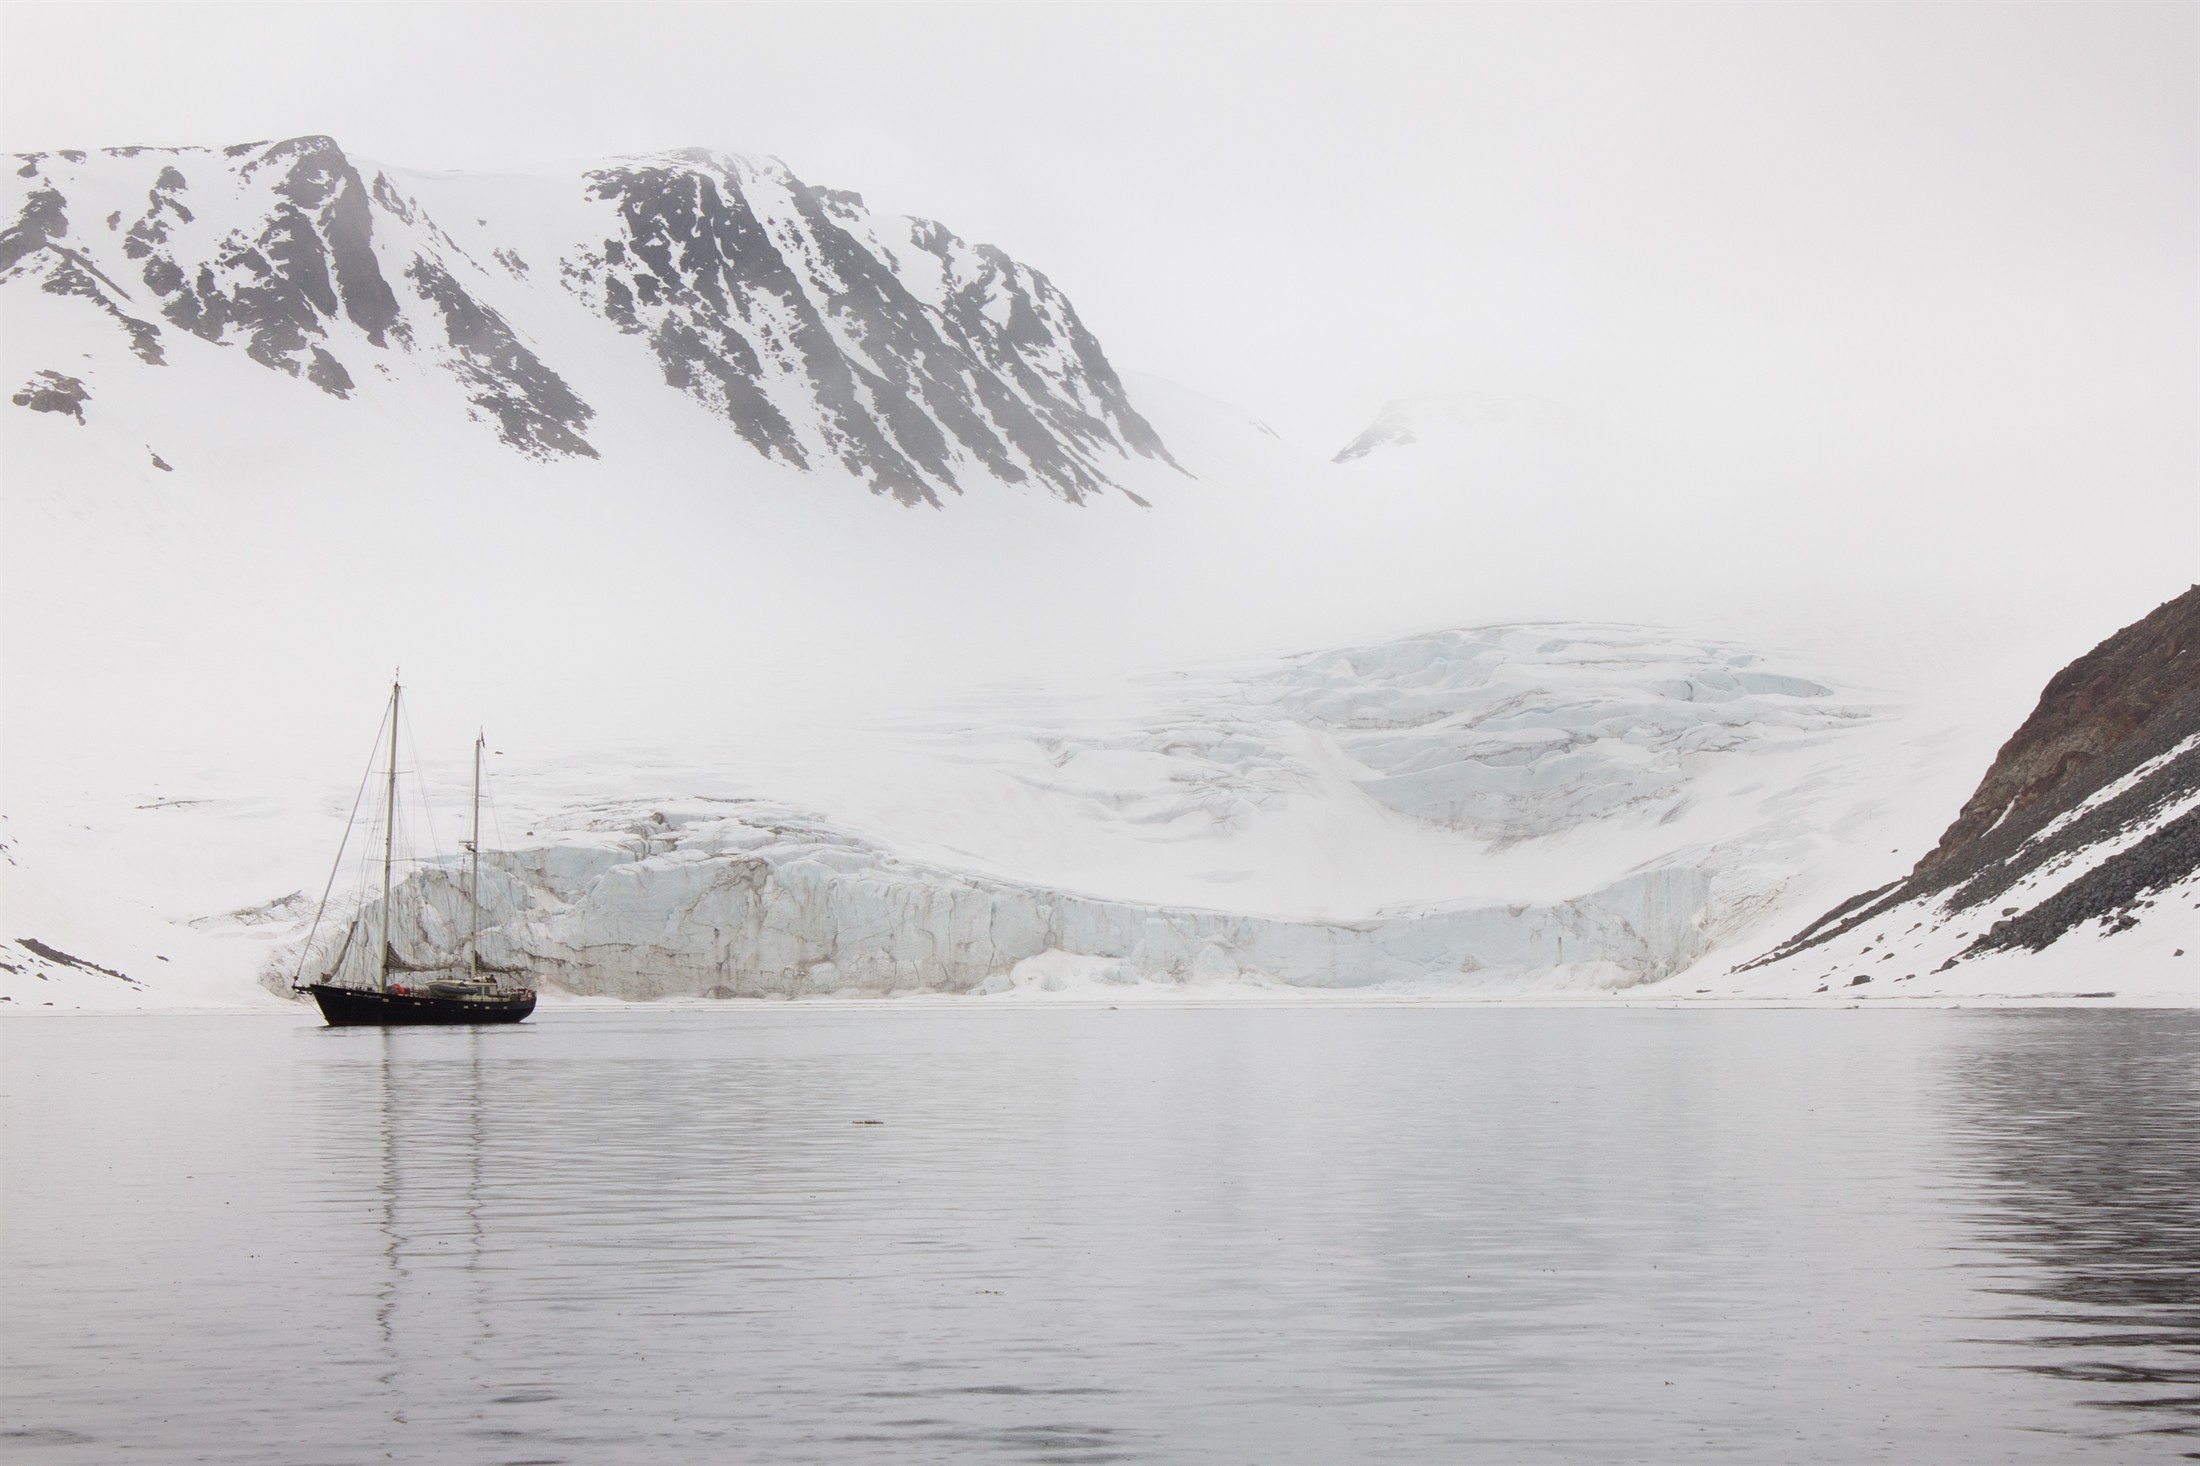 Private yacht in polar waters, near Svalbard